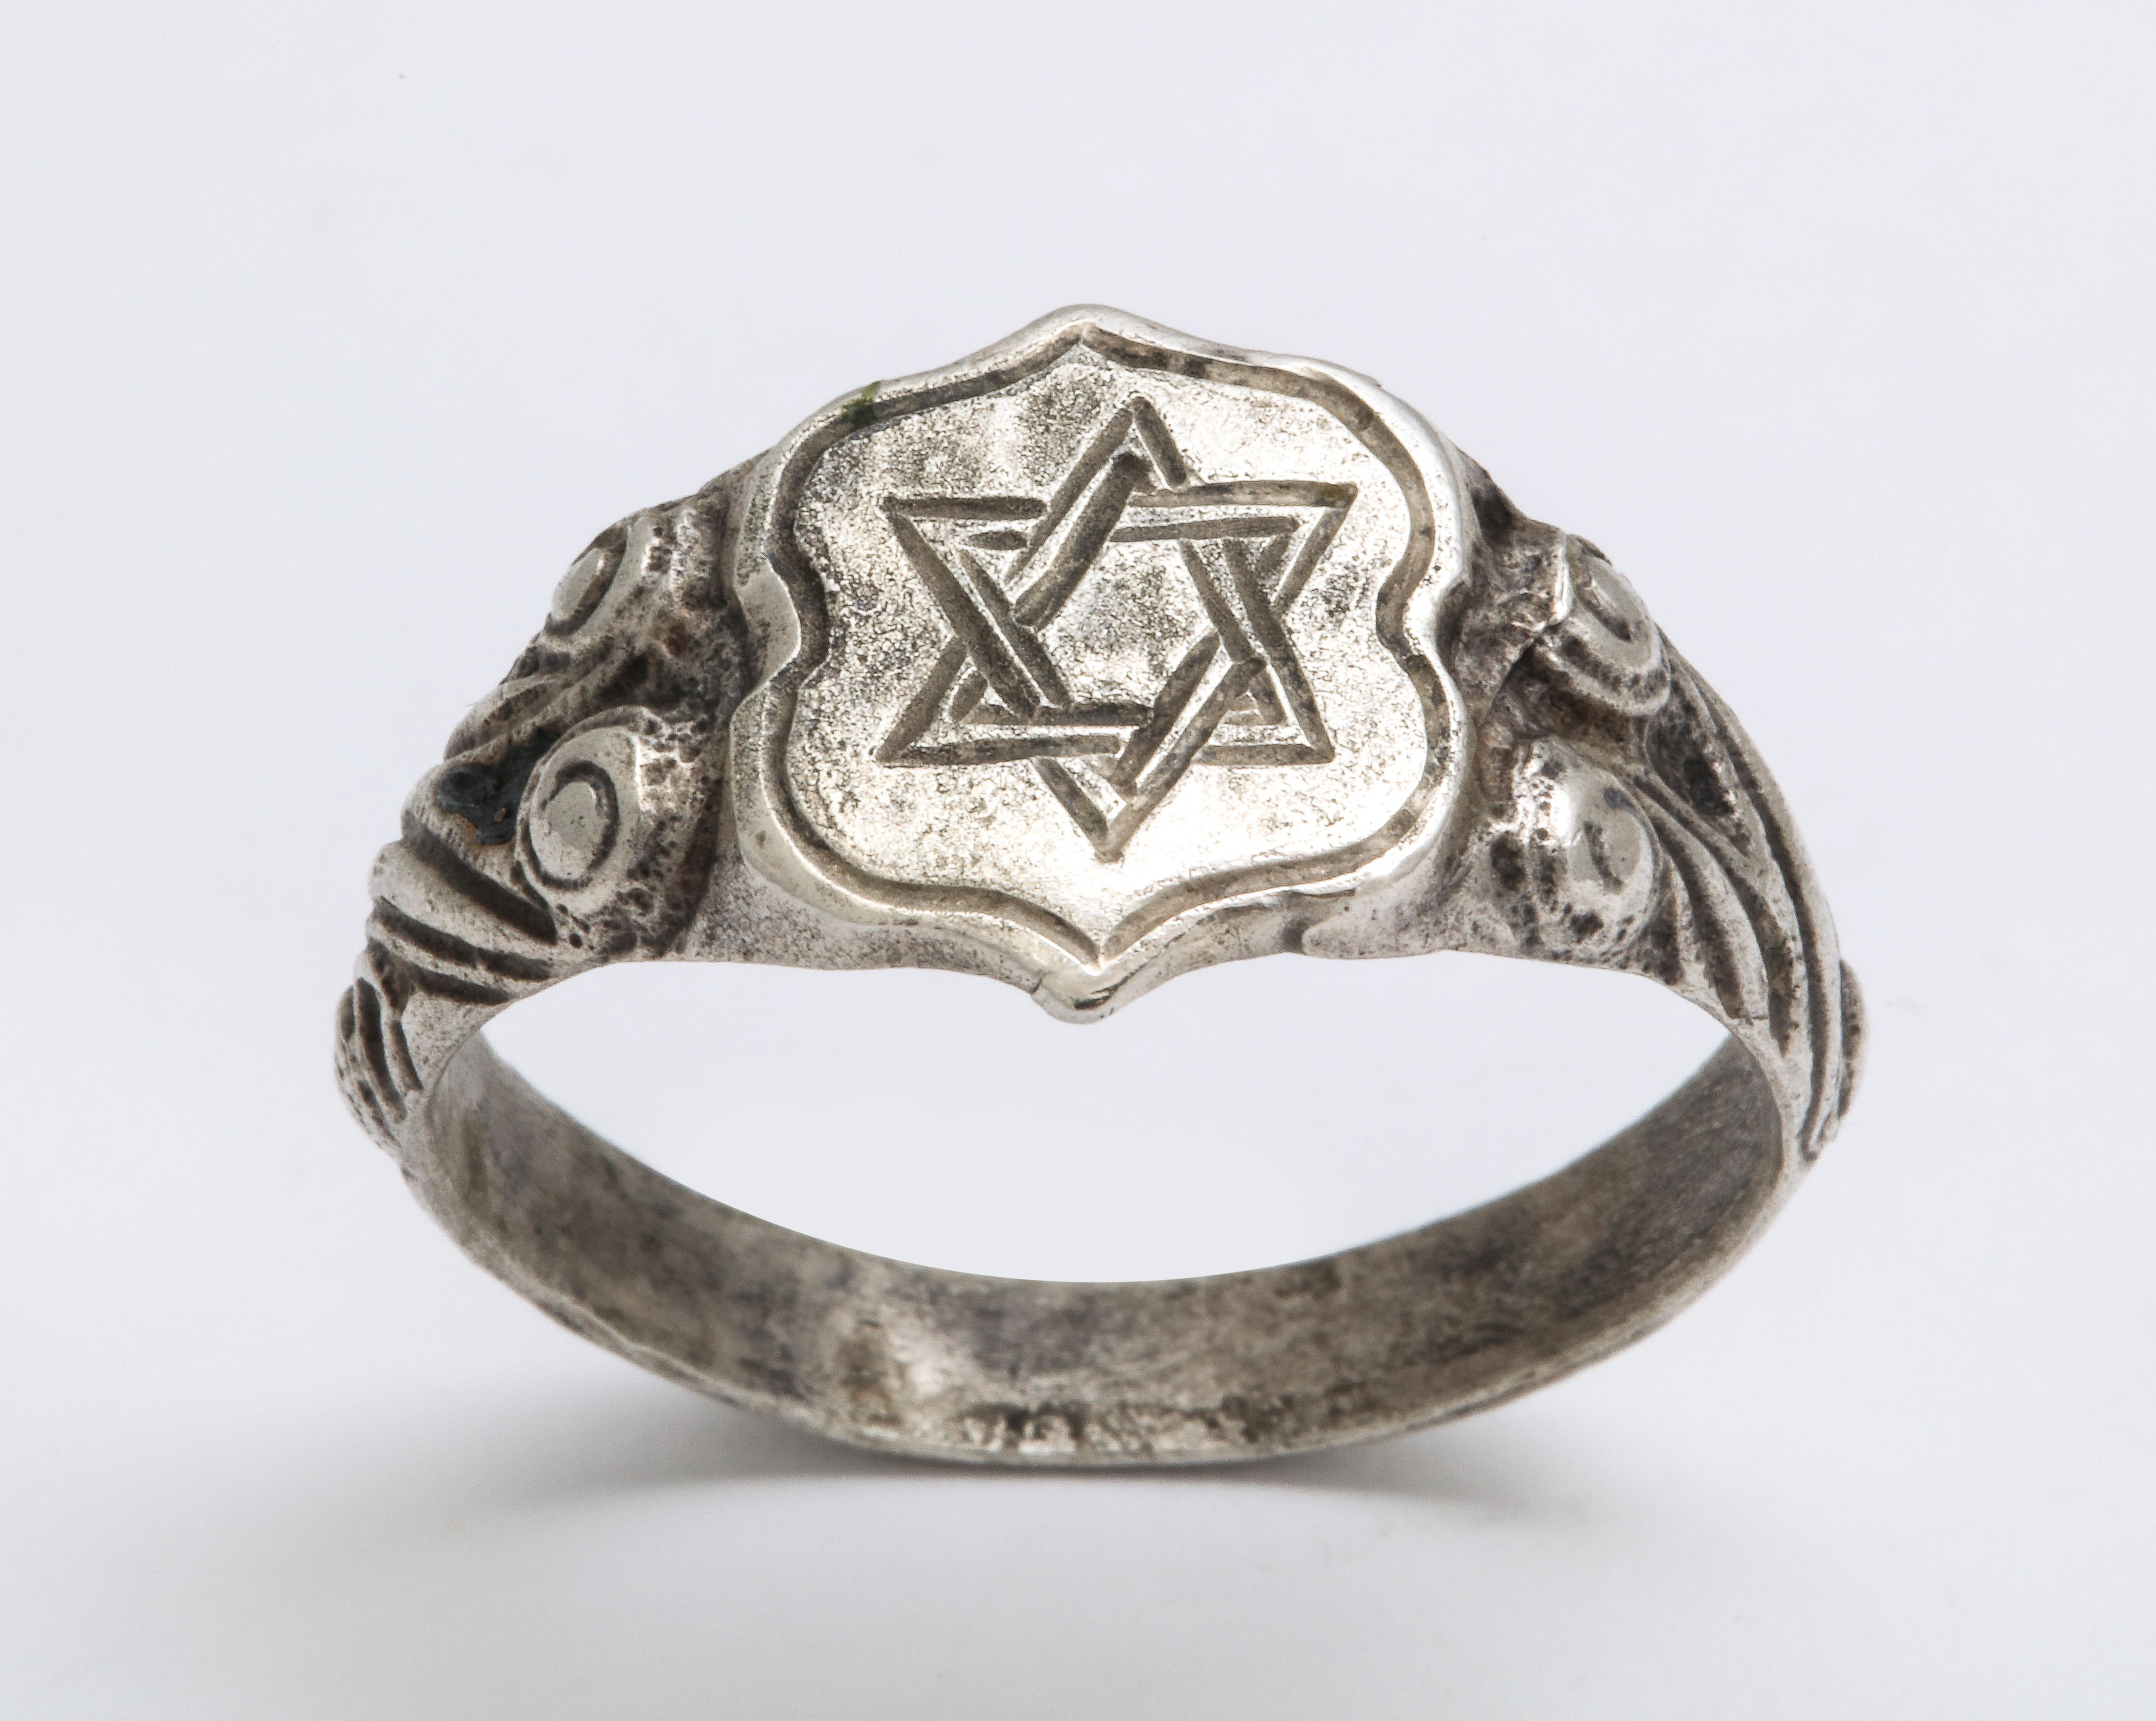 For ancient history buffs, here is medieval Silver ring 